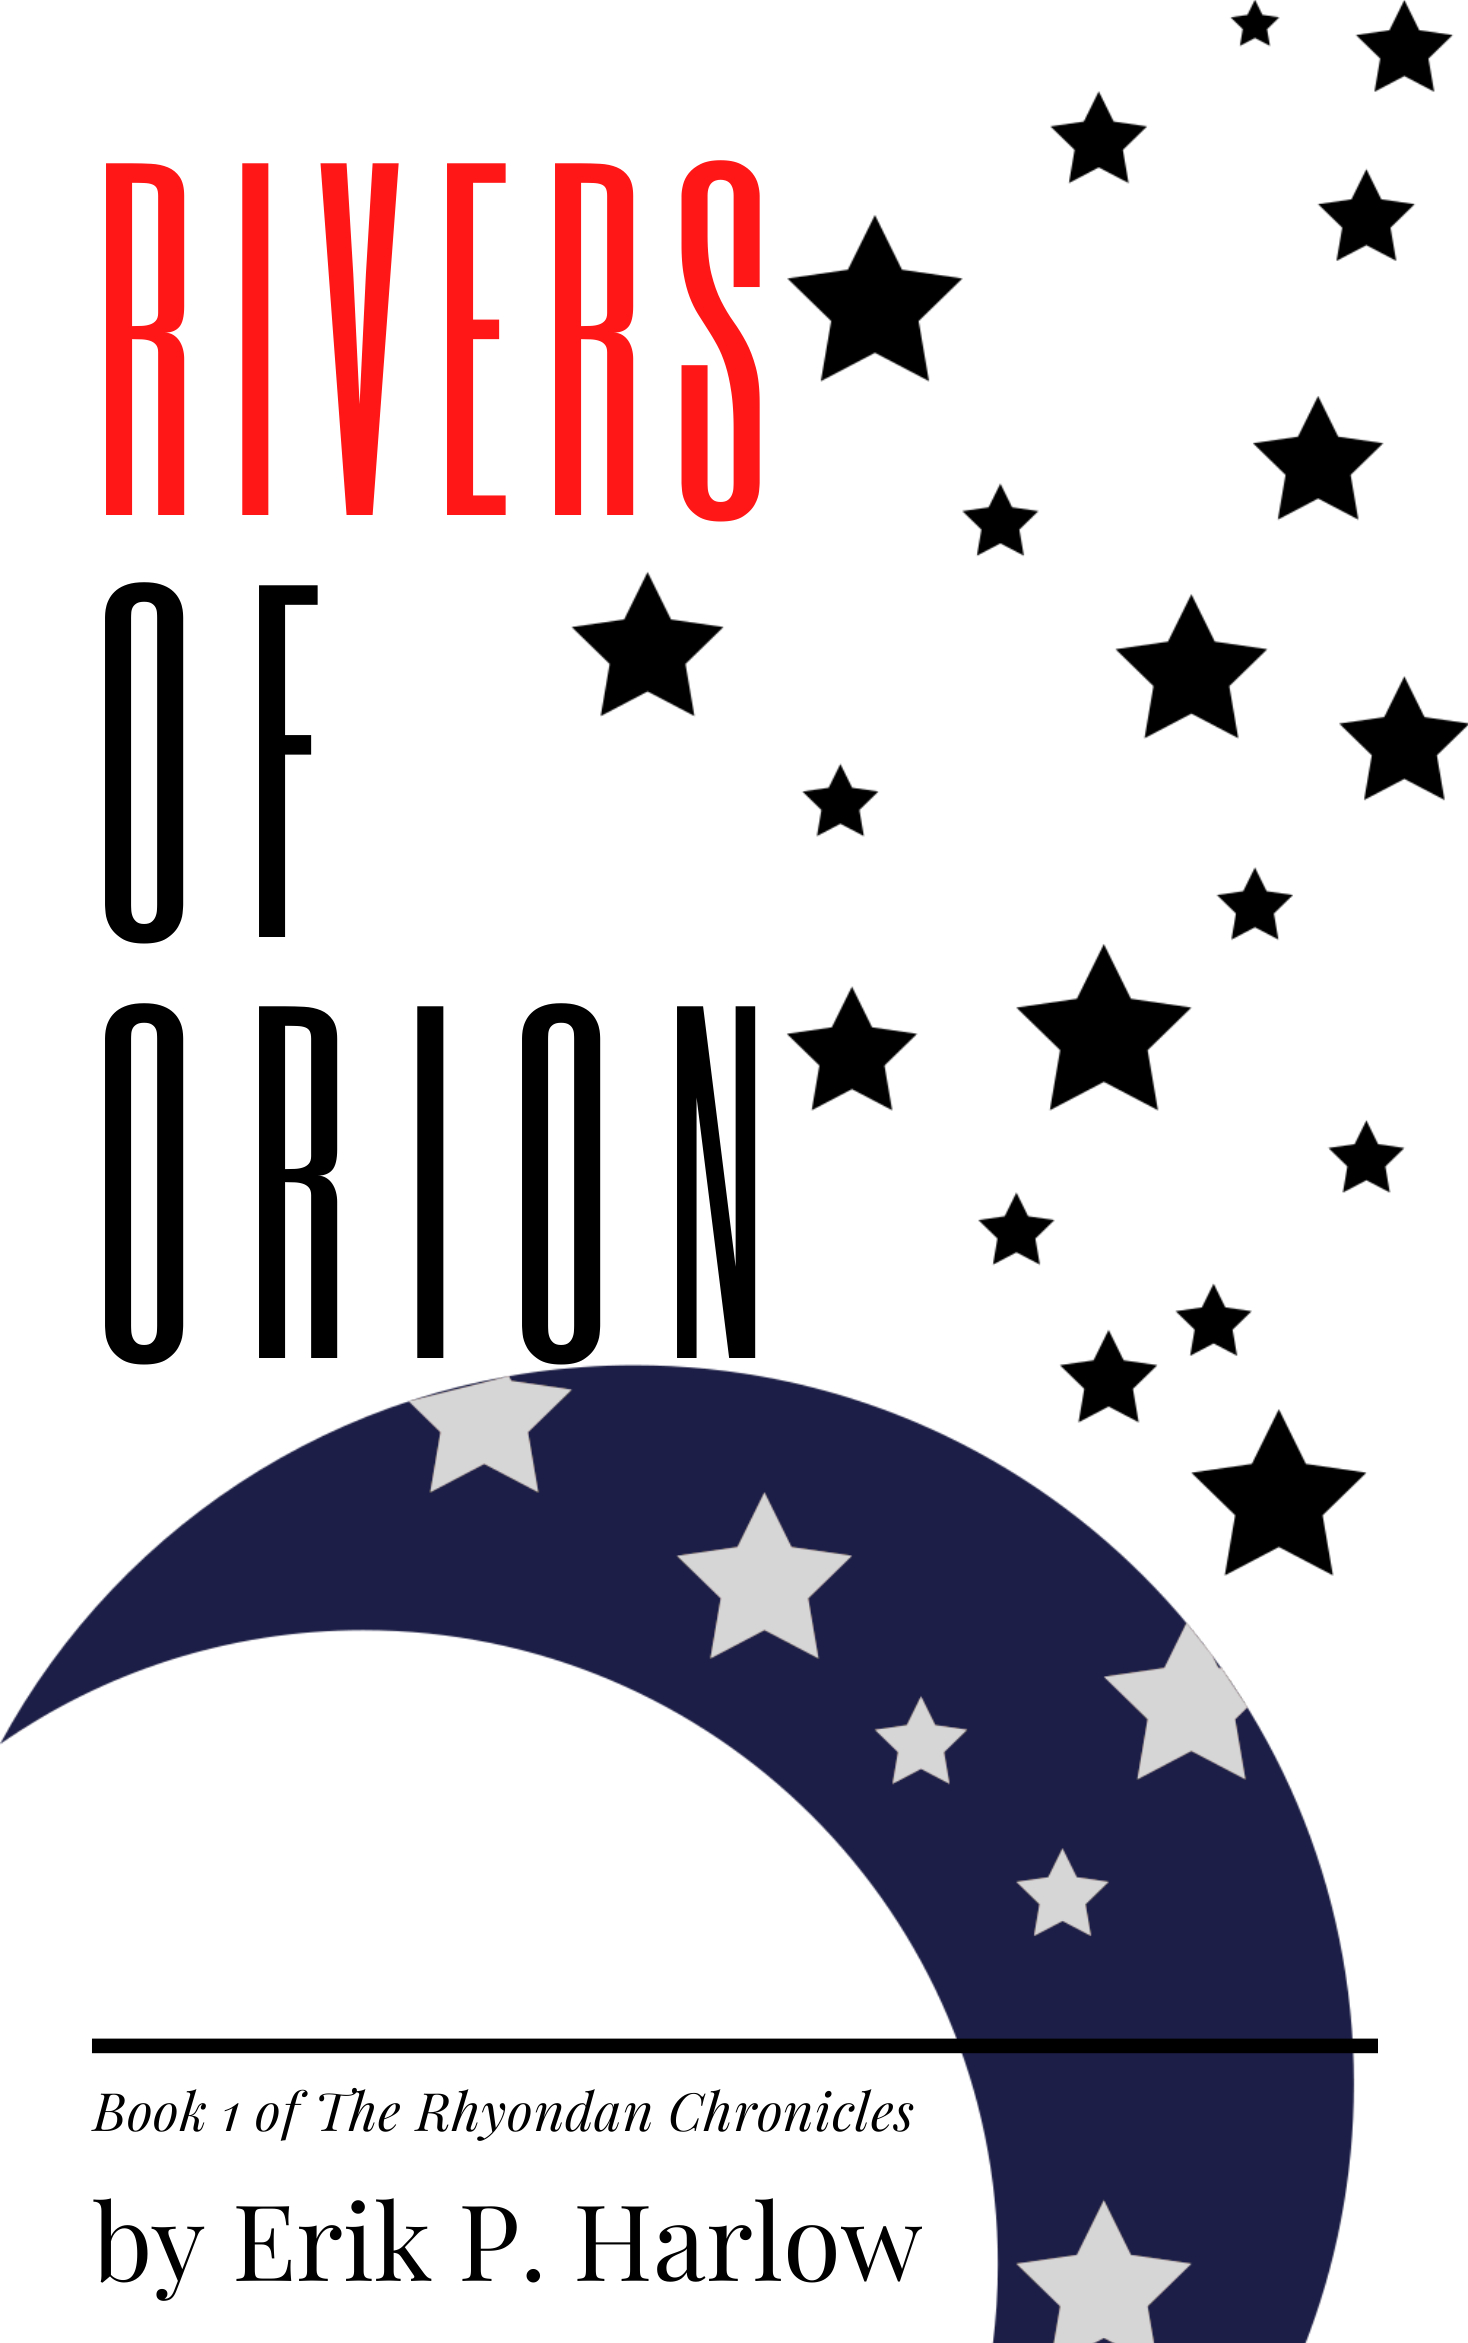 FREE: Rivers of Orion by Erik P. Harlow